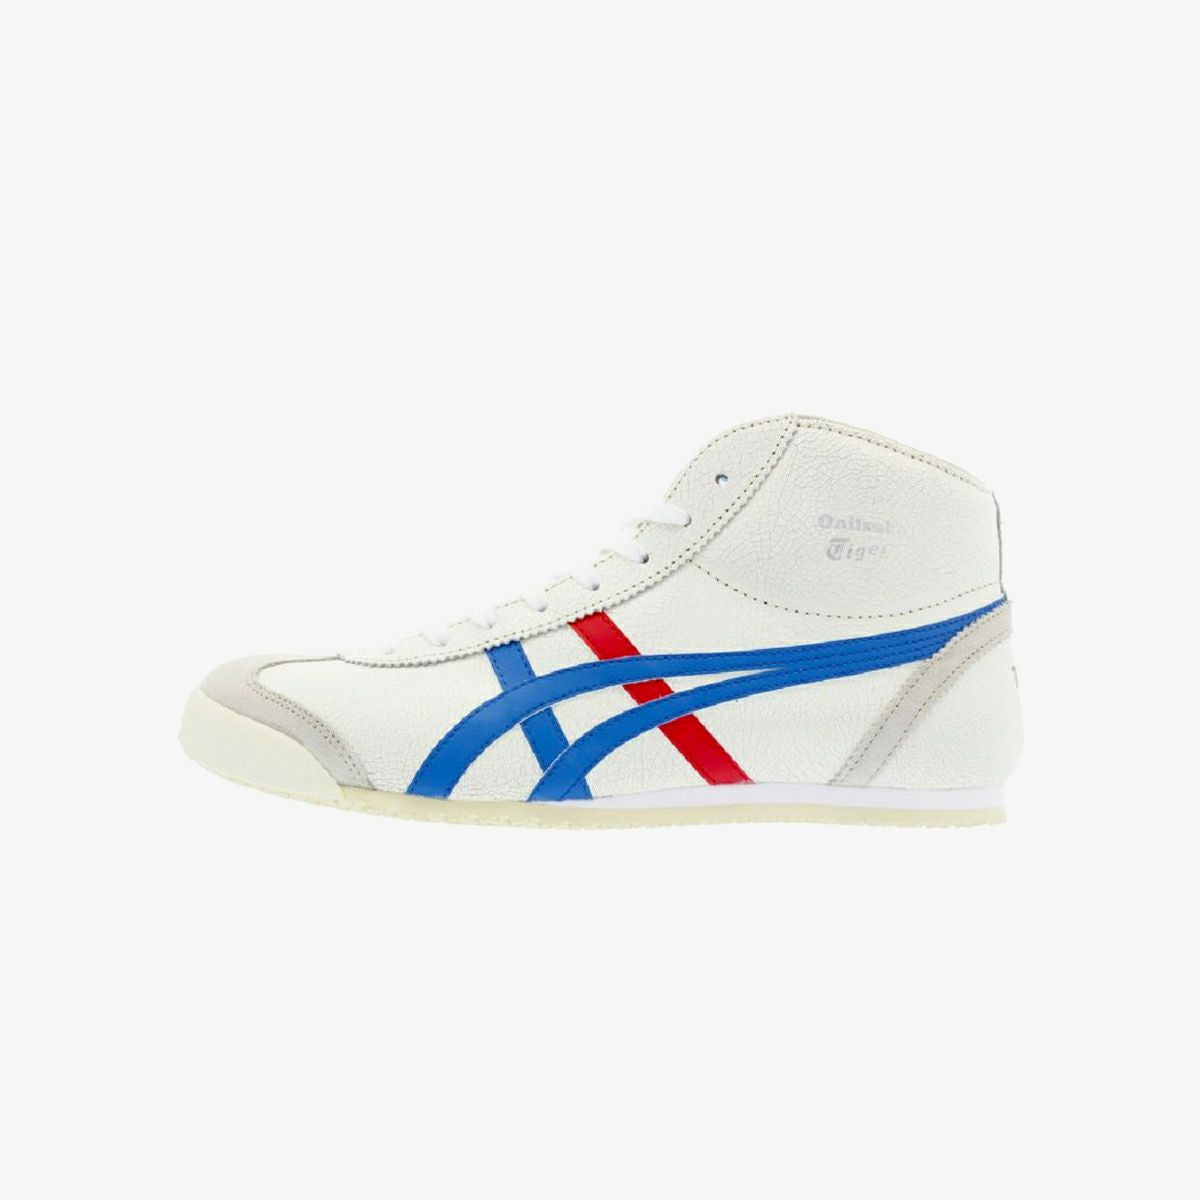 Onitsuka Tiger MEXICO MID RUNNER WHITE/BLUE/RED thl328-0142 